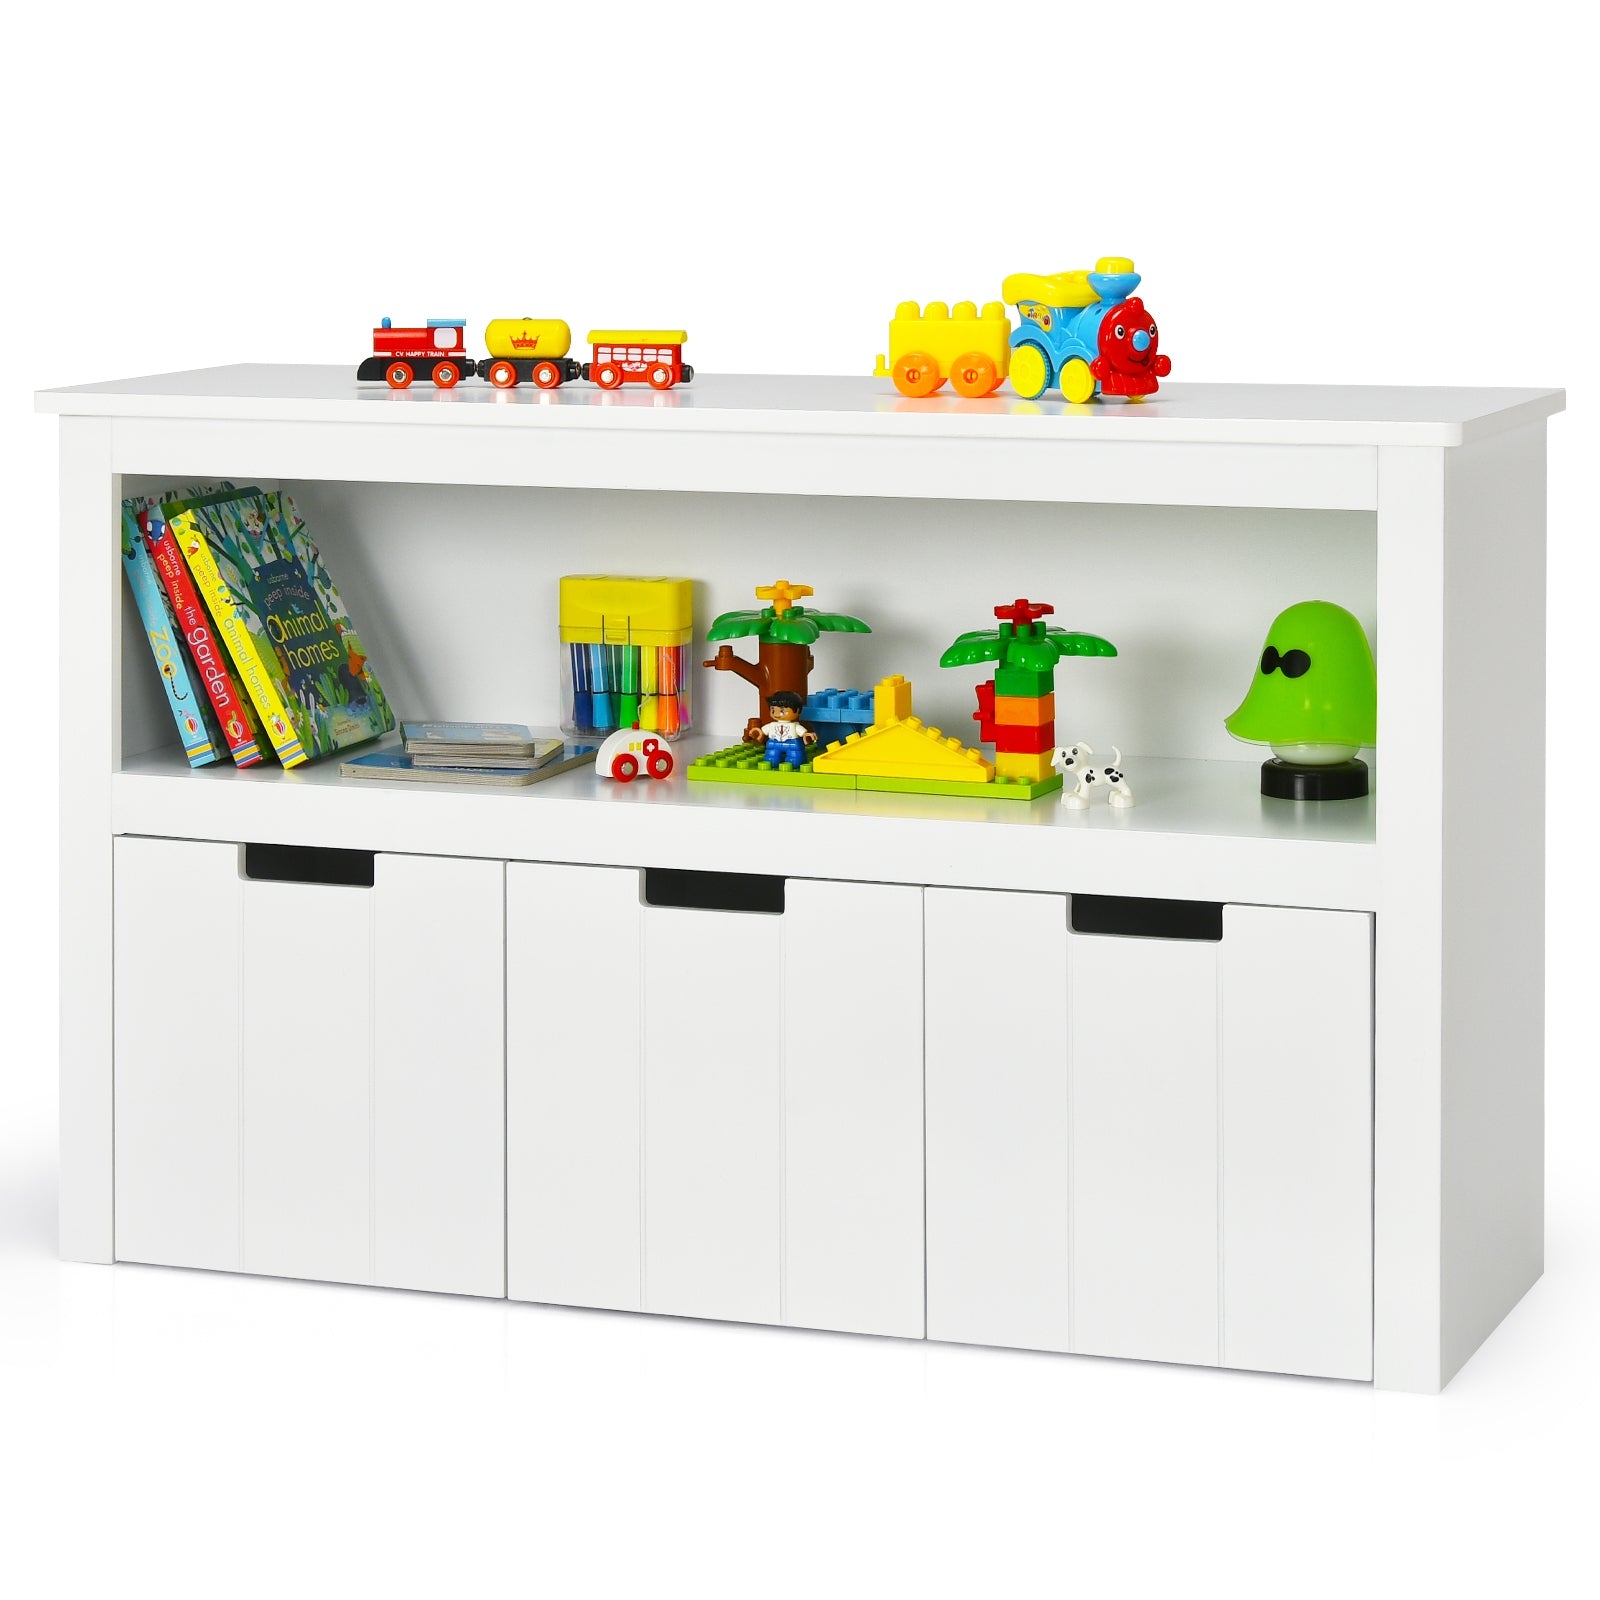 Hikidspace Slide-Out Drawers Kids Toy Storage Cabinet for Bedroom